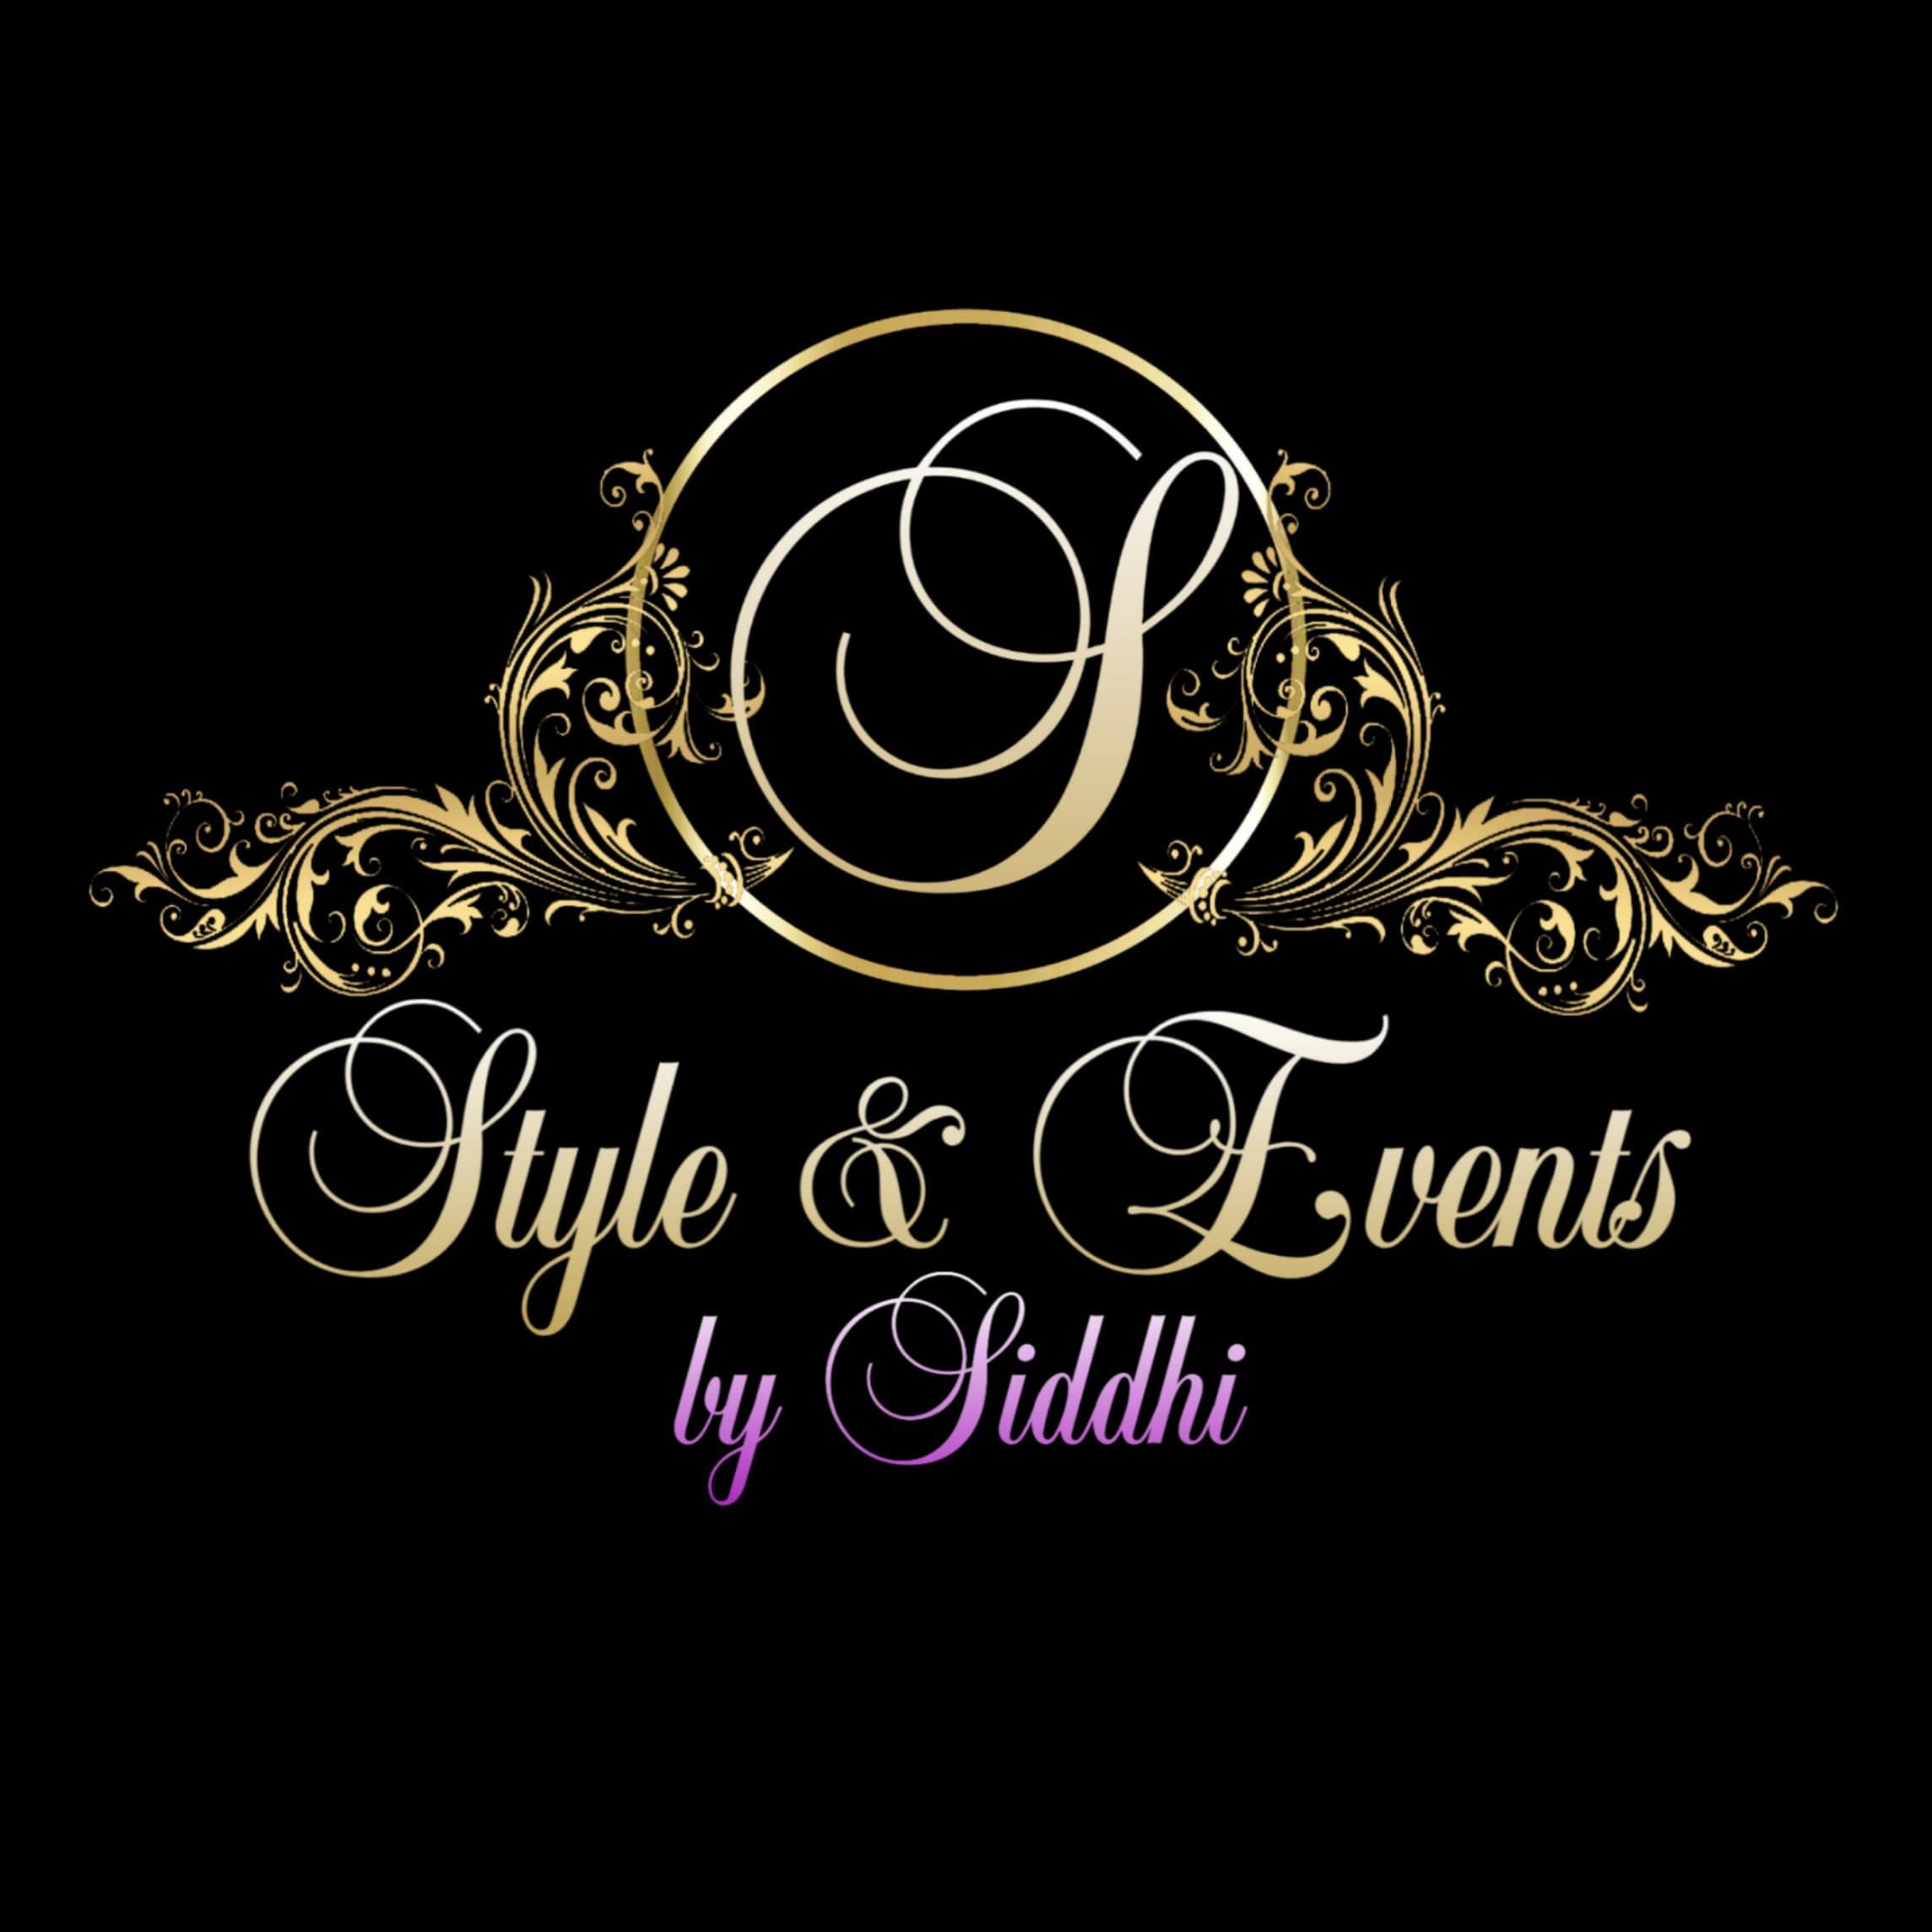 Style & Events by Sid